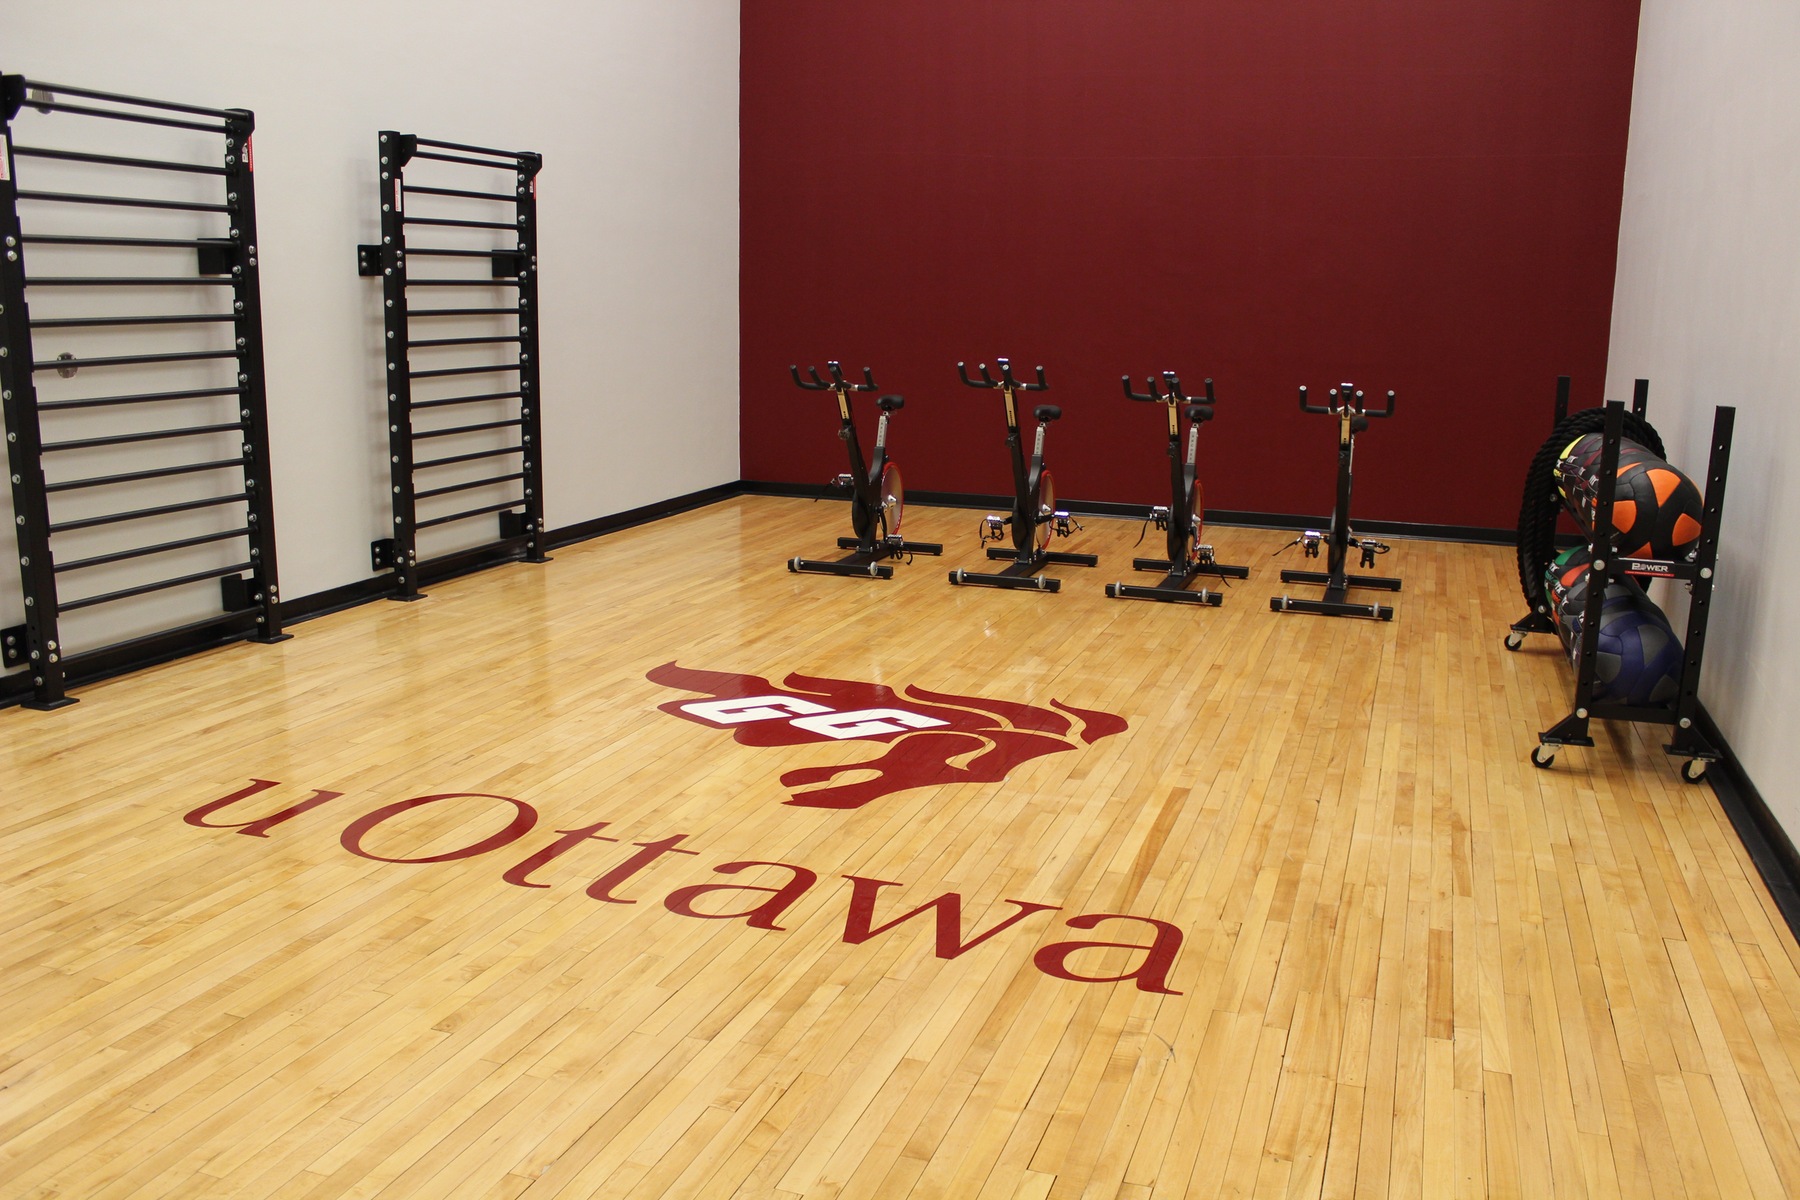 Gee-Gees logo on wooden floor with stationary bikes and wall racks.